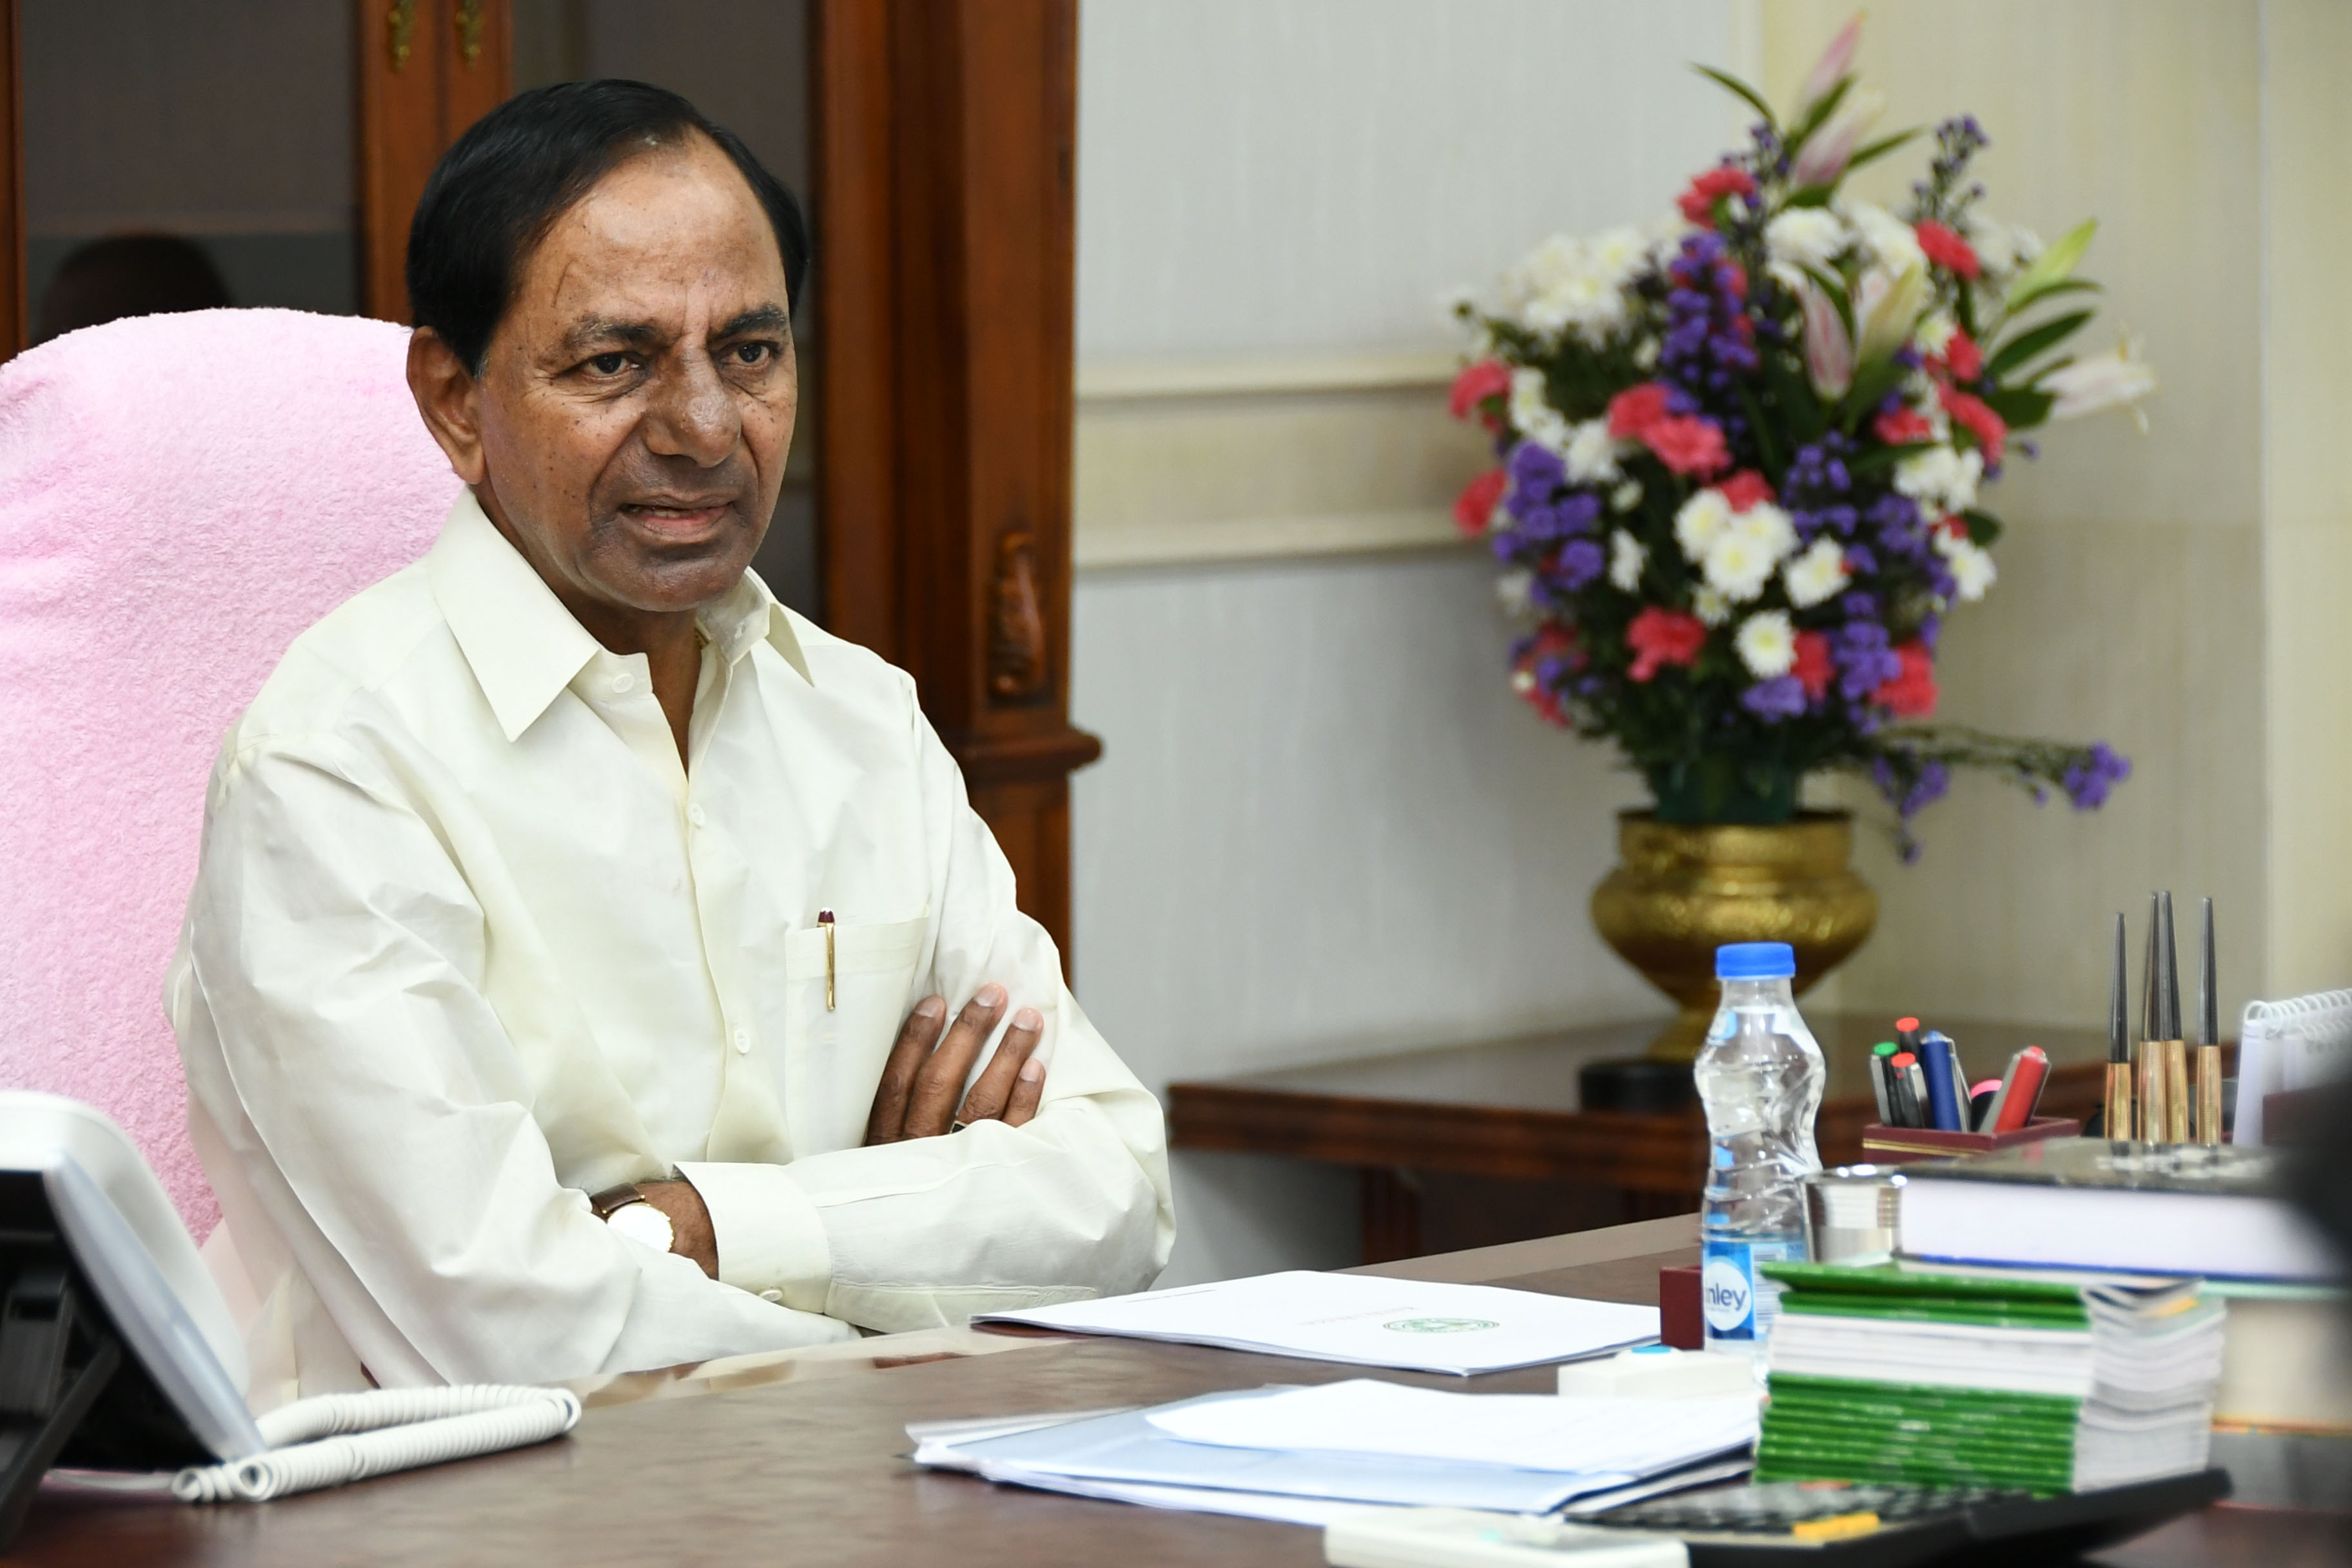 Telangana CM KCR called Y.S. Jagan over telephone & enquired about his health and elicited information on Attack on him